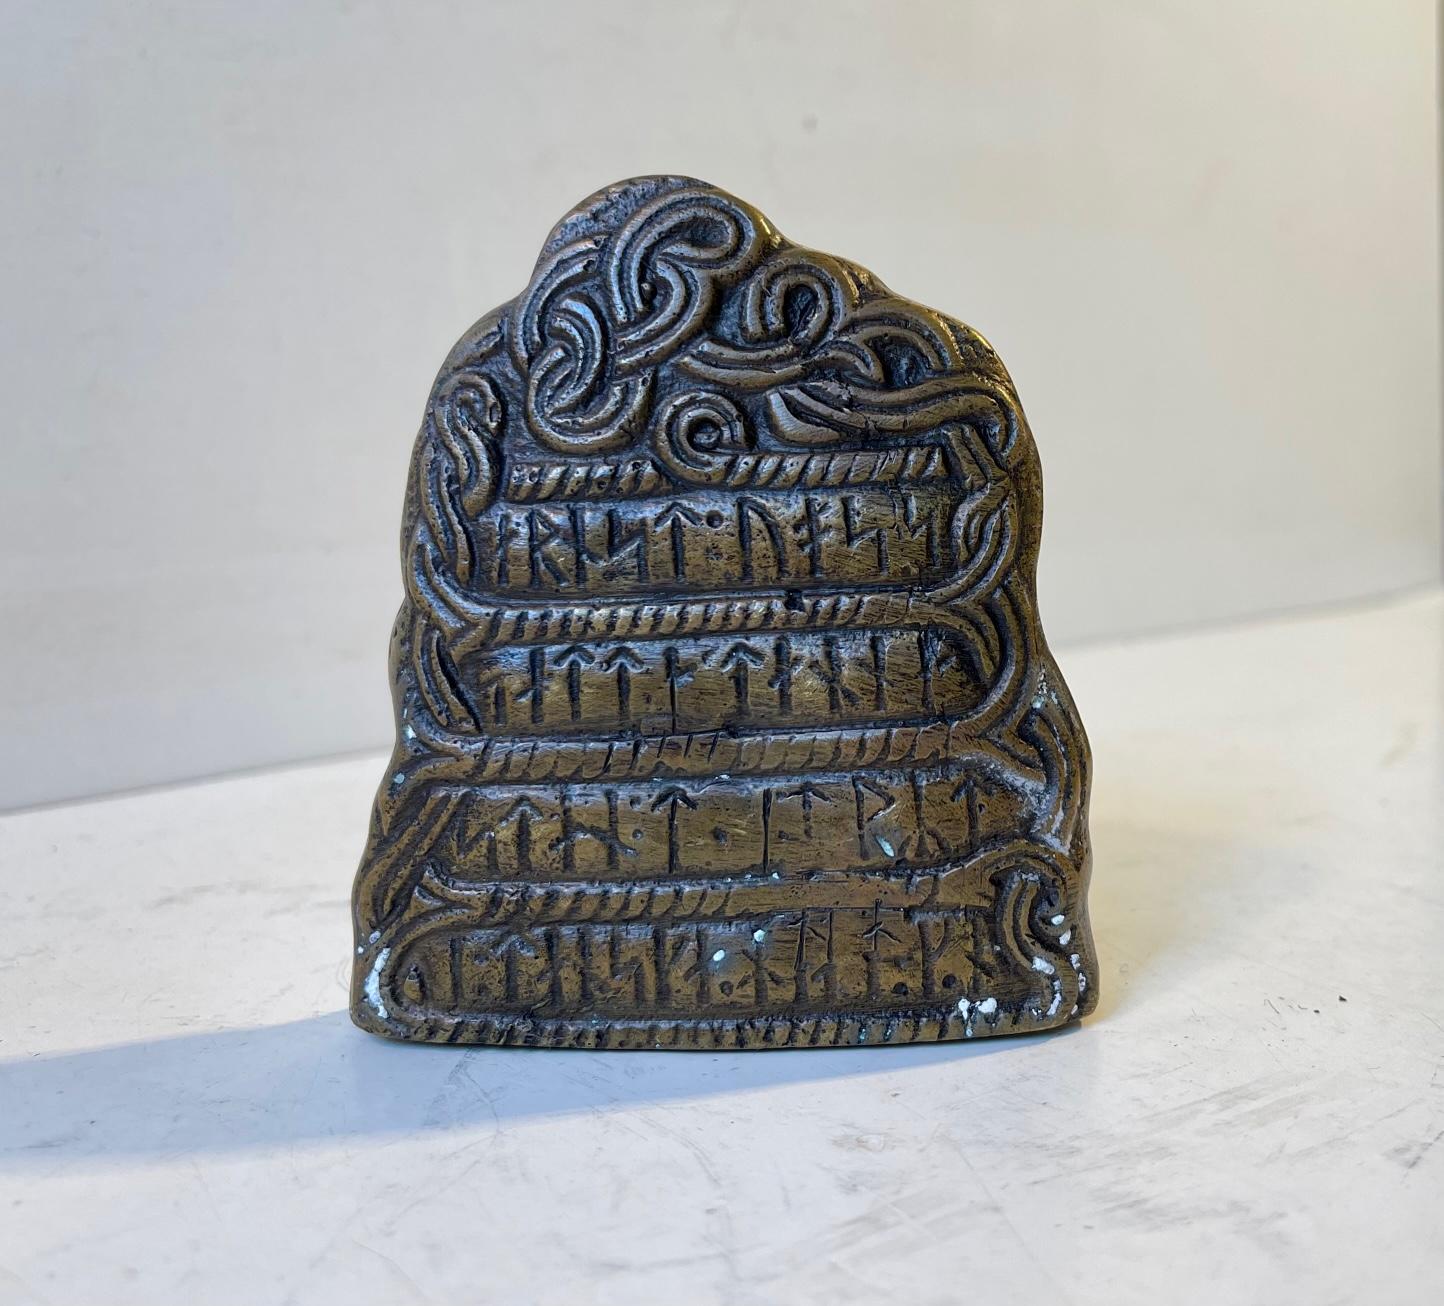 Detailed model in bronze depicting what we believe is the famous Jellingestenen/Jellinge Stone in Denmark. It is executed in cast bronze and can be displayed decoratively or used as a paperweight. It is sculpted around plaster hence a few spots here